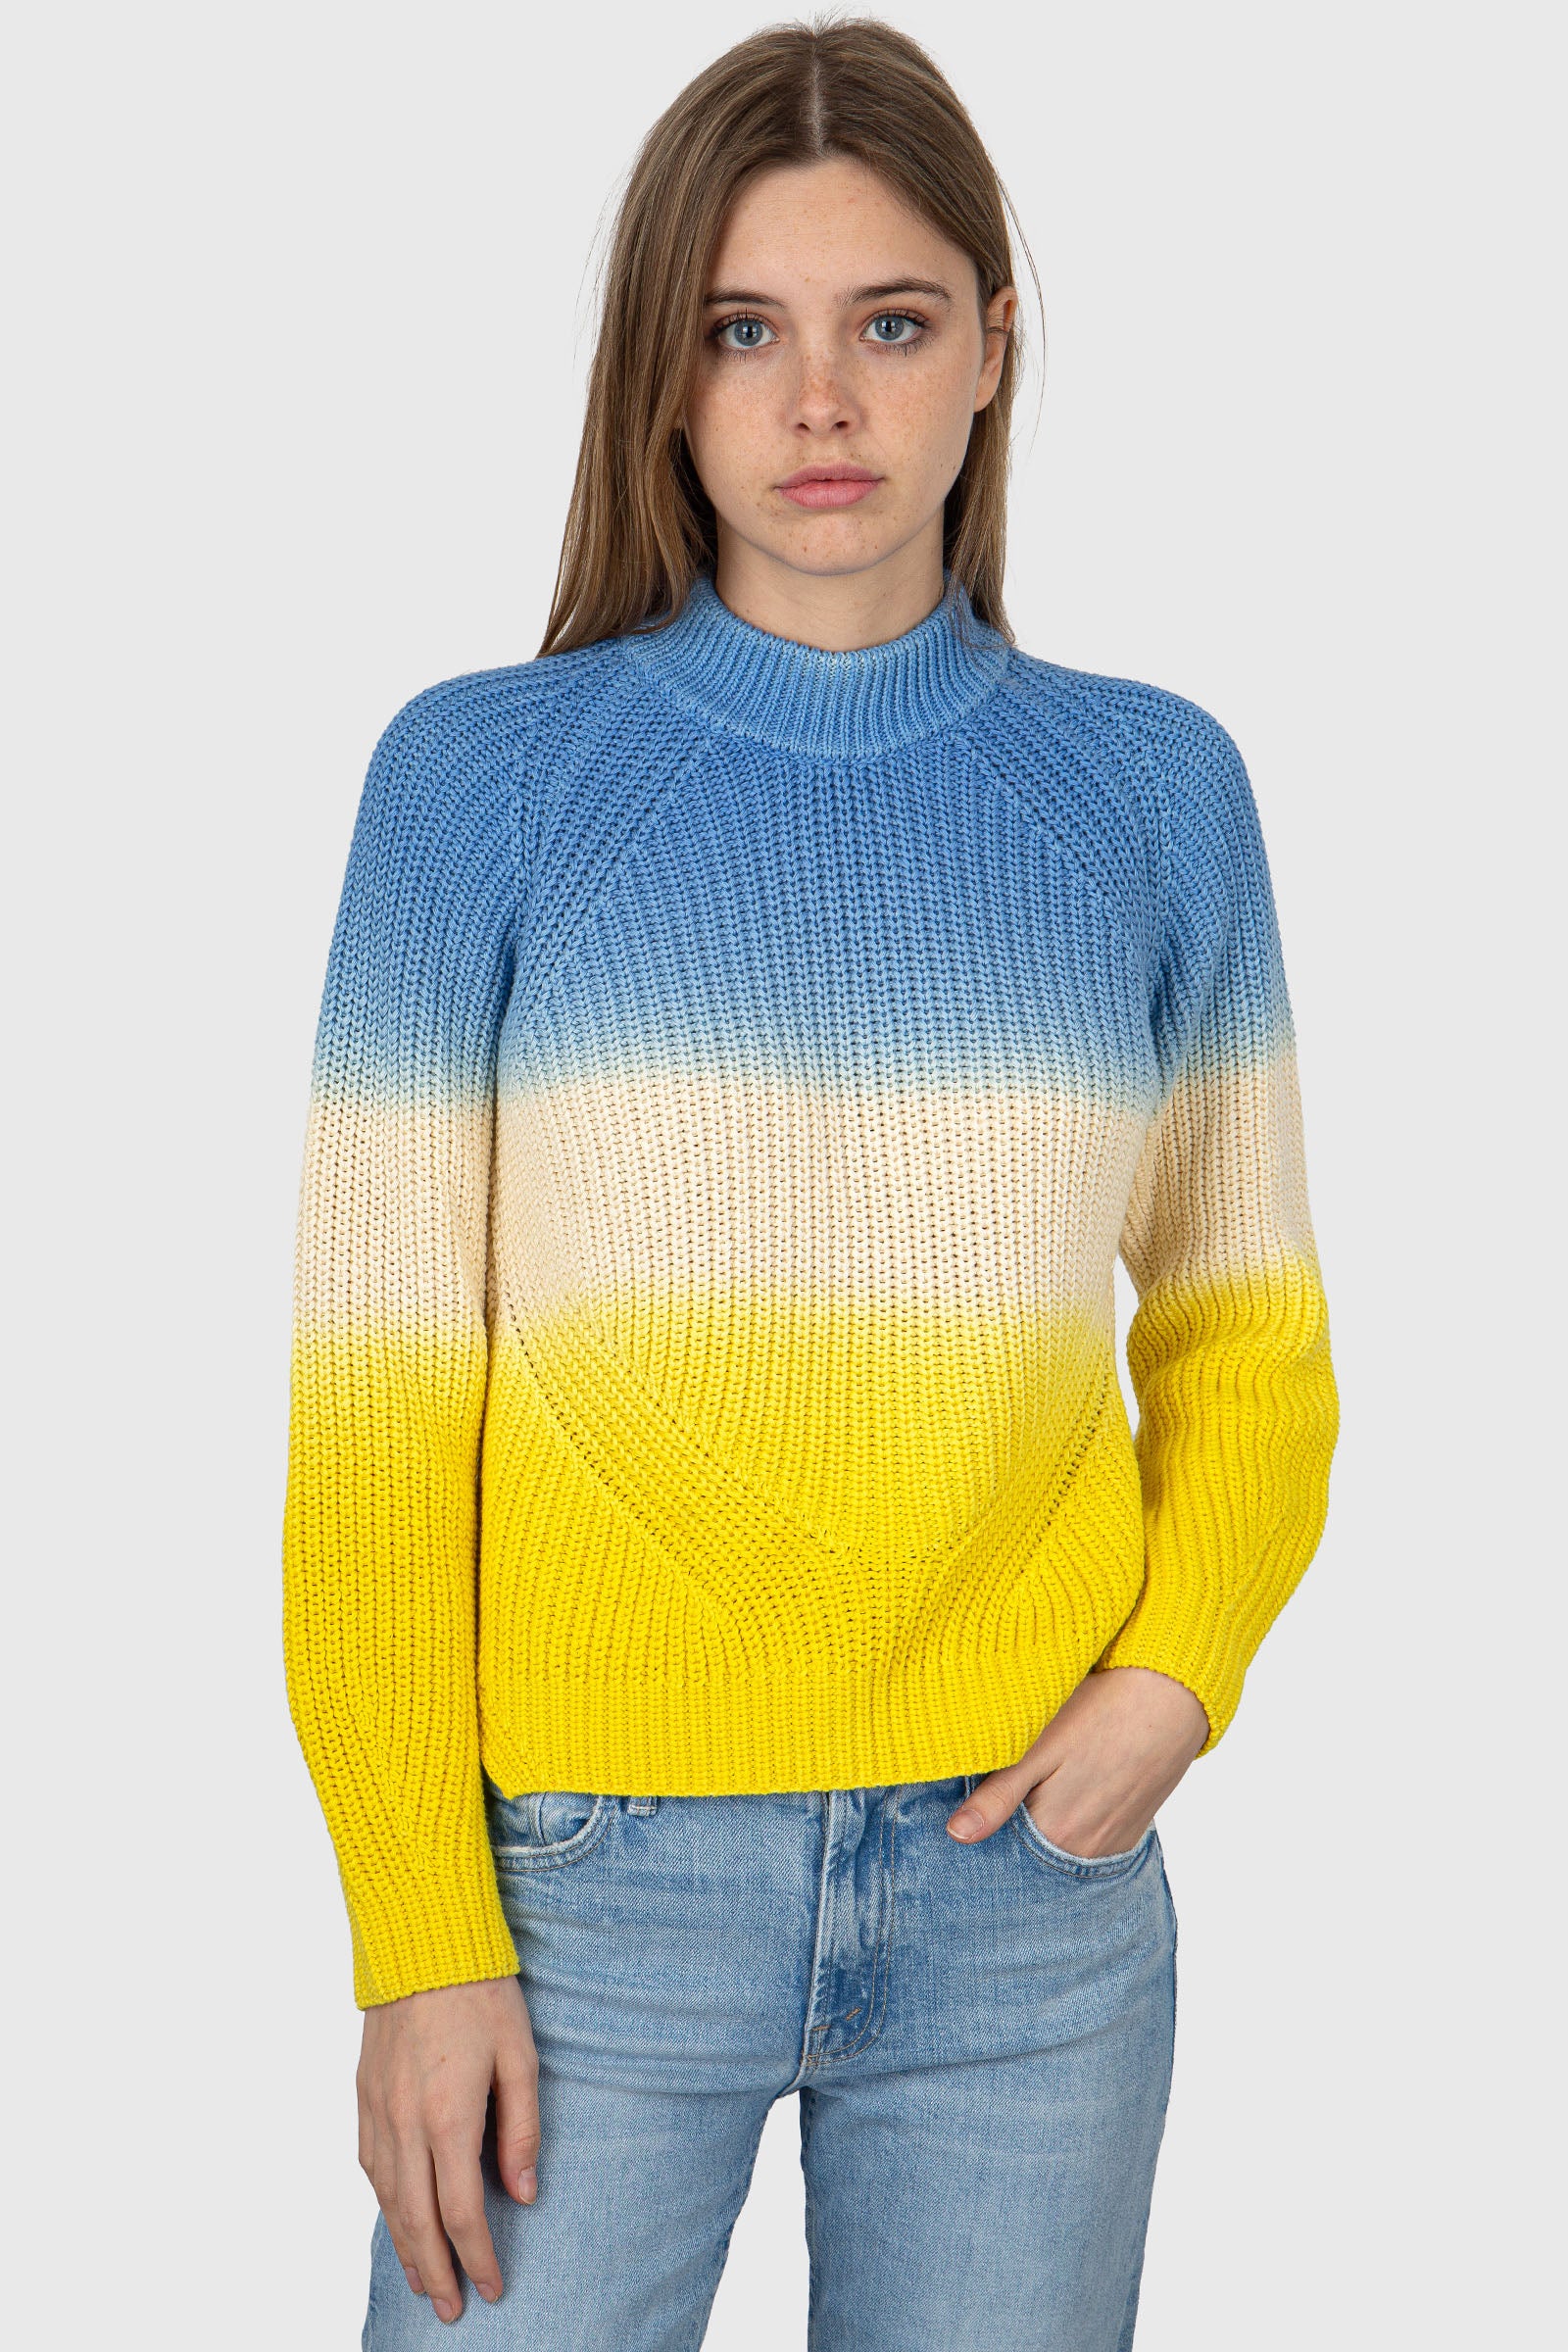 Woolrich Solid Color Crewneck Sweater in Pure Multicolor Cotton - 2